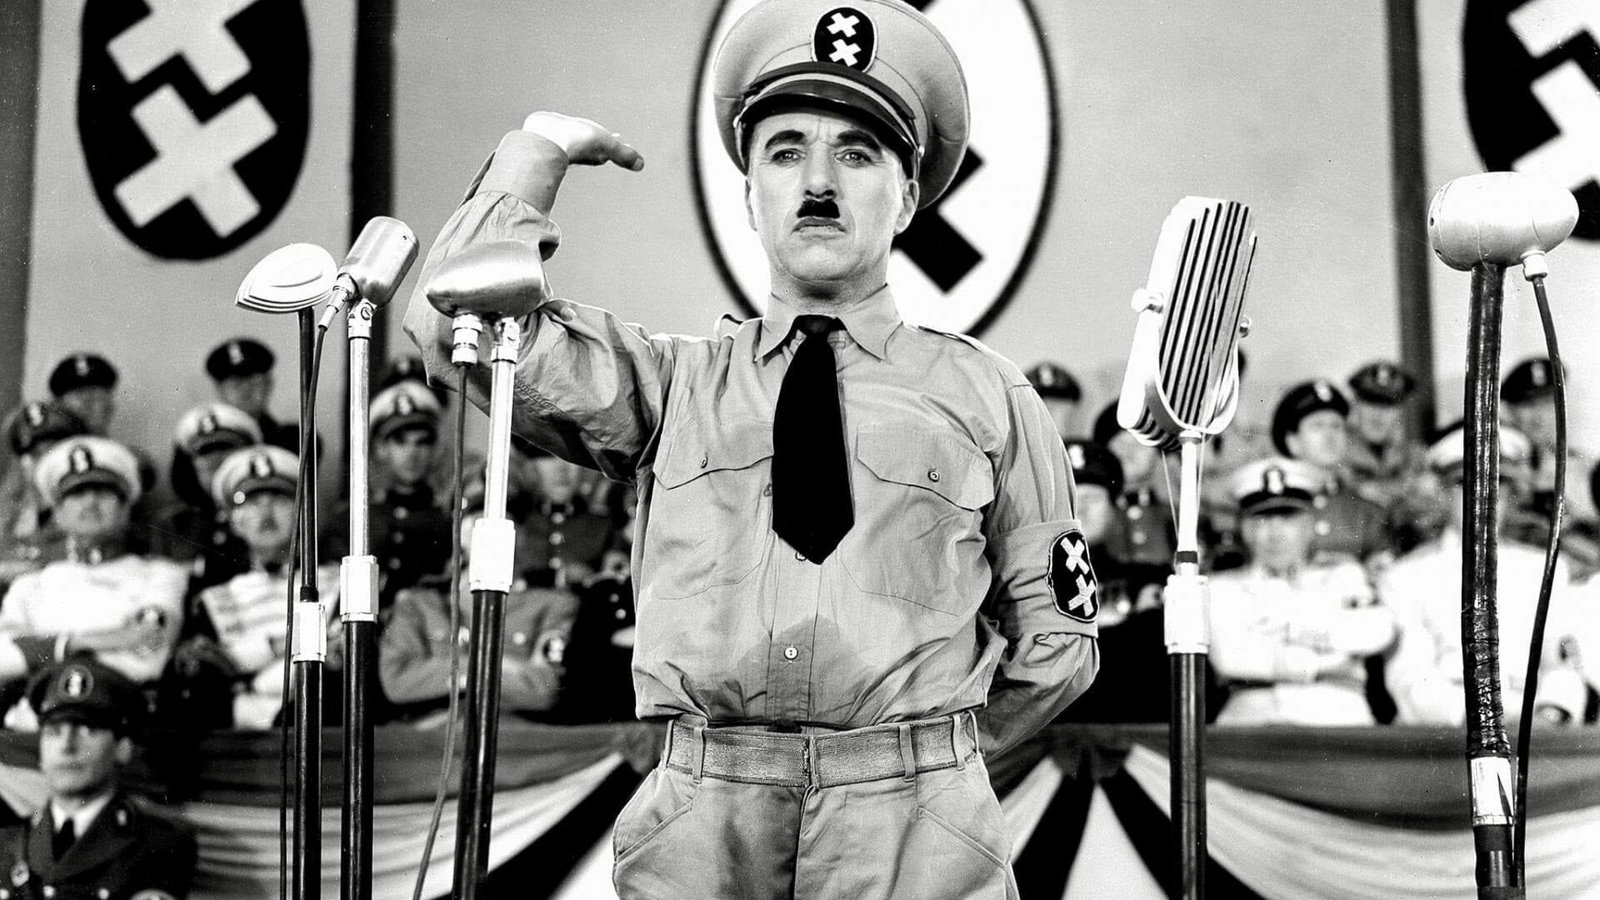 Best movies on HBO max: The Great Dictator (1940)